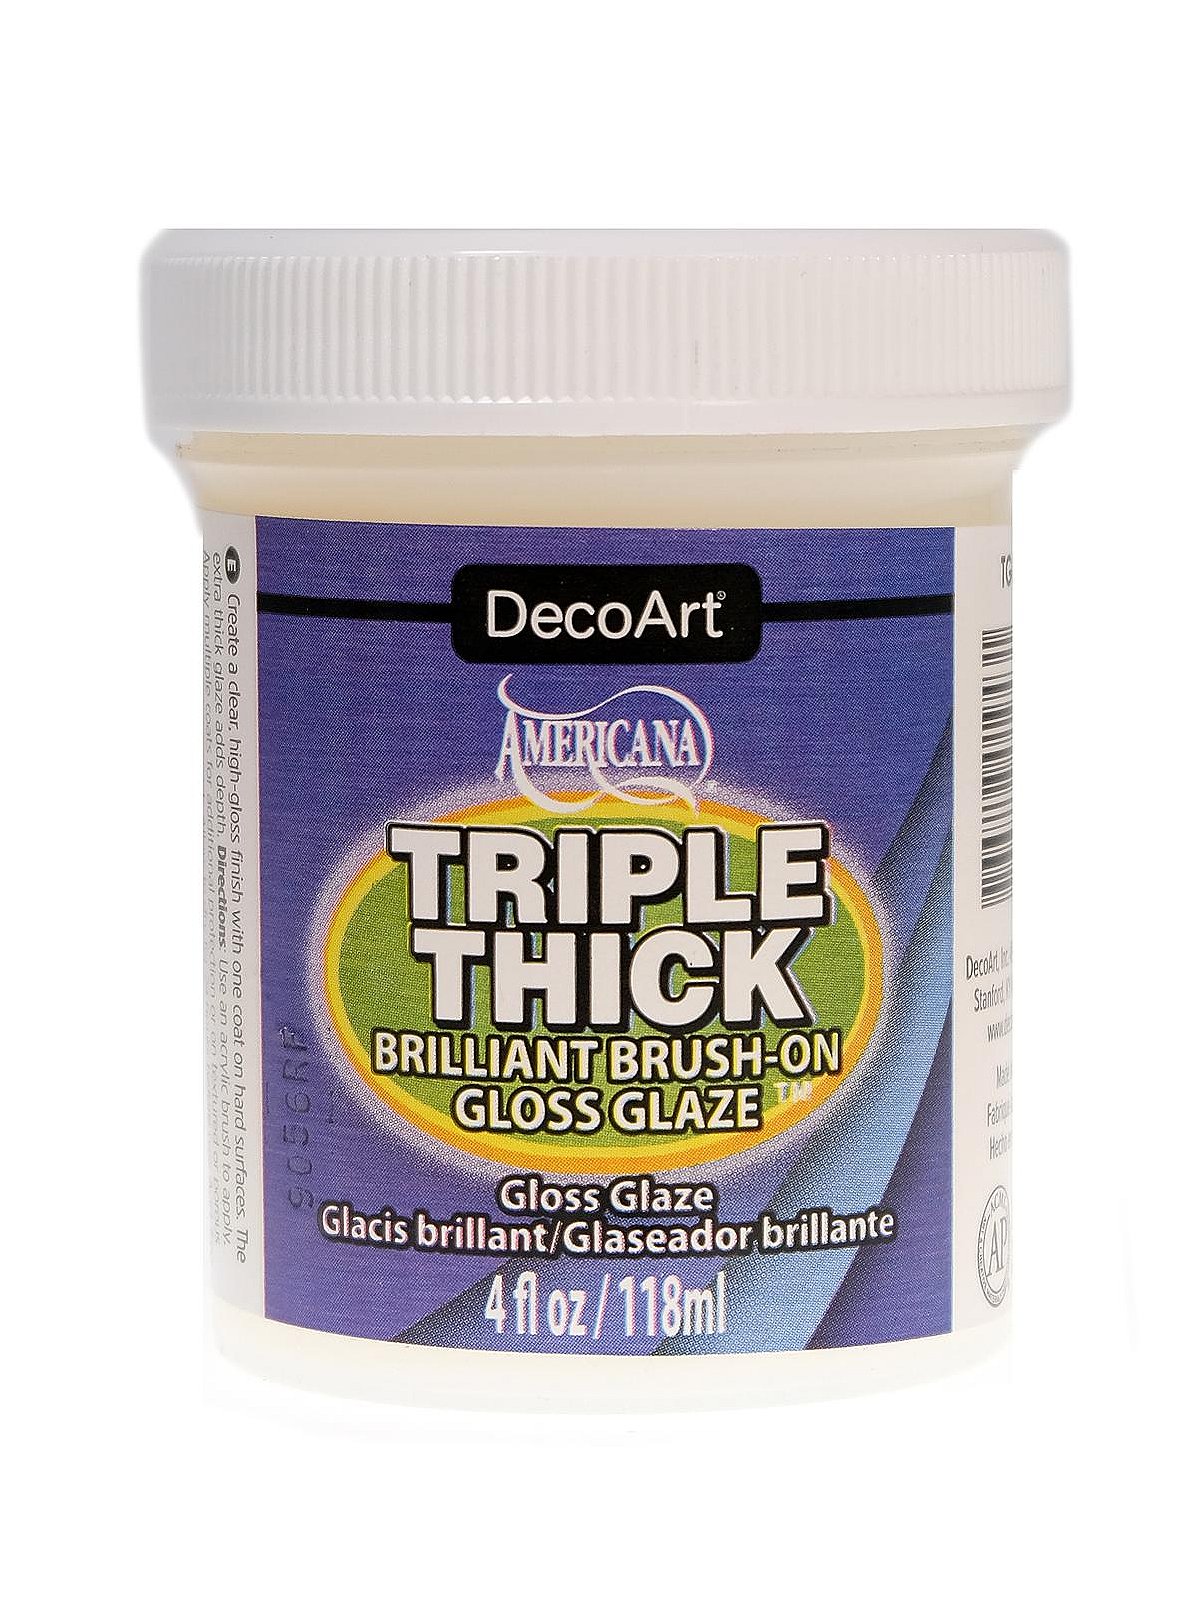 Varnish reviews for Decoart Triple Thick Brush-on Gloss Glaze and